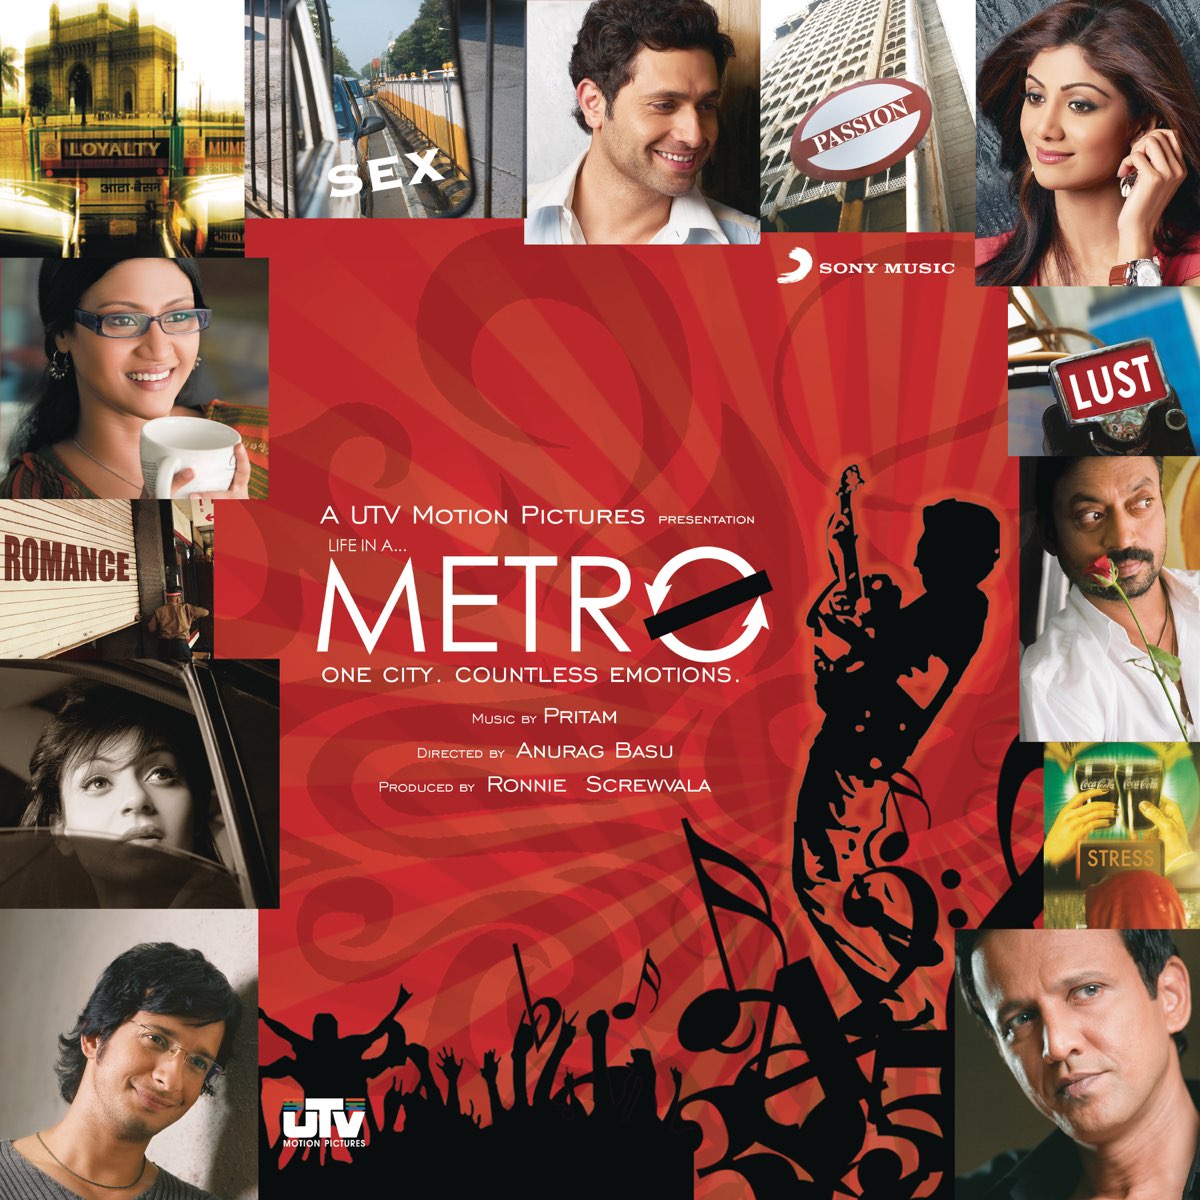 Life In a Metro (Original Motion Picture Soundtrack) by Pritam on Apple  Music